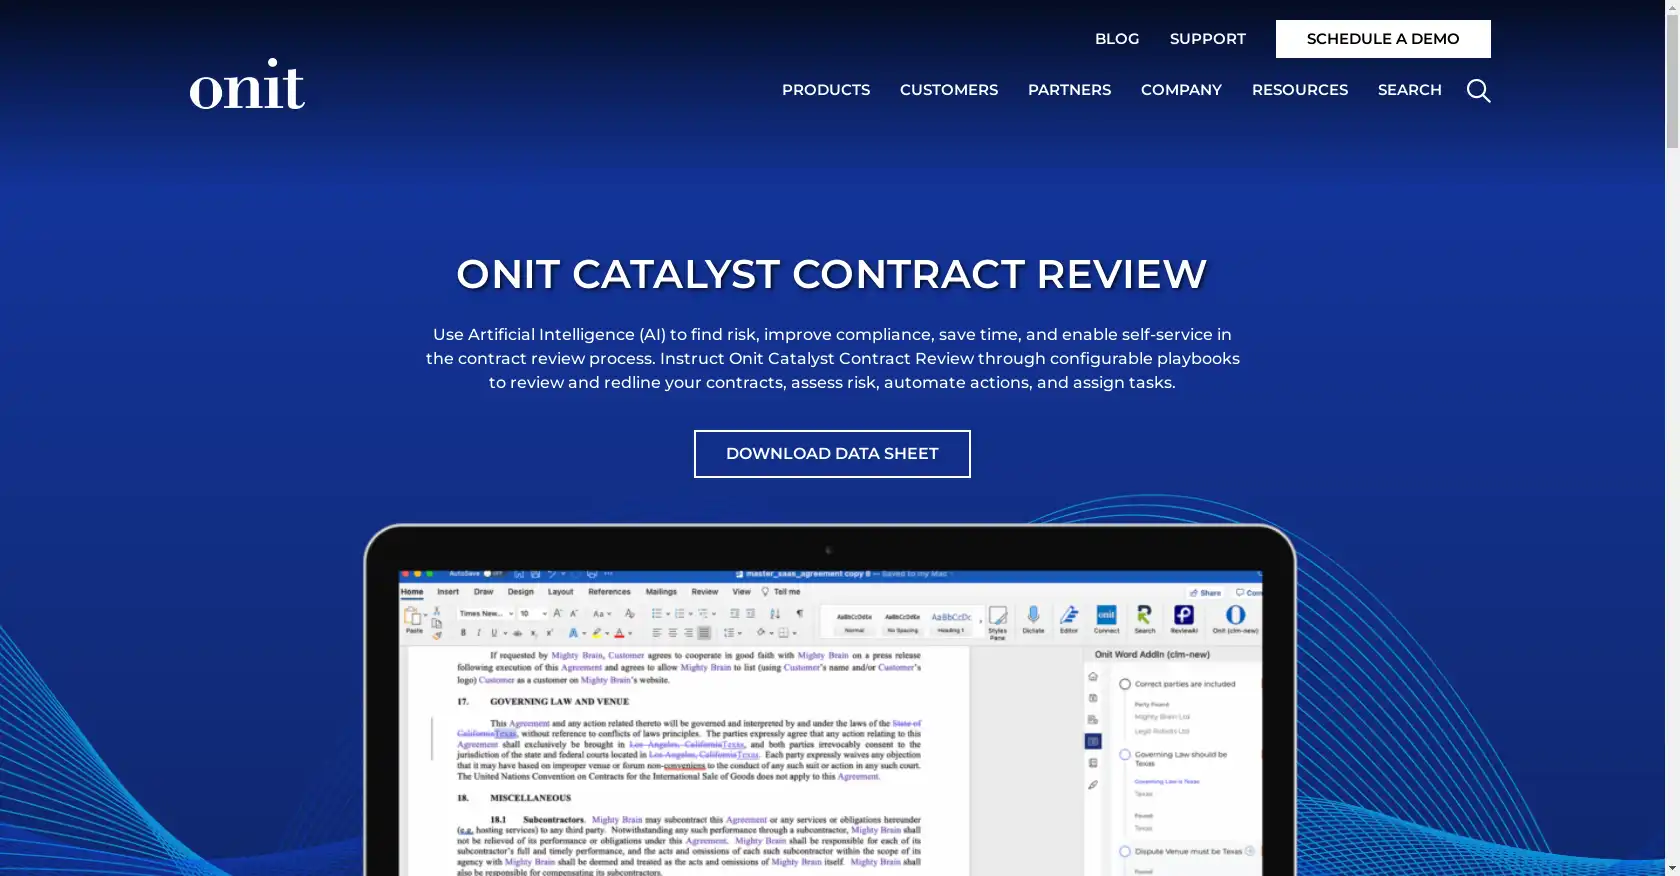 Onit Catalyst - AI tool for Risk reduction, Contract analysis, Risk assessment, Contract Review, Compliance assurance